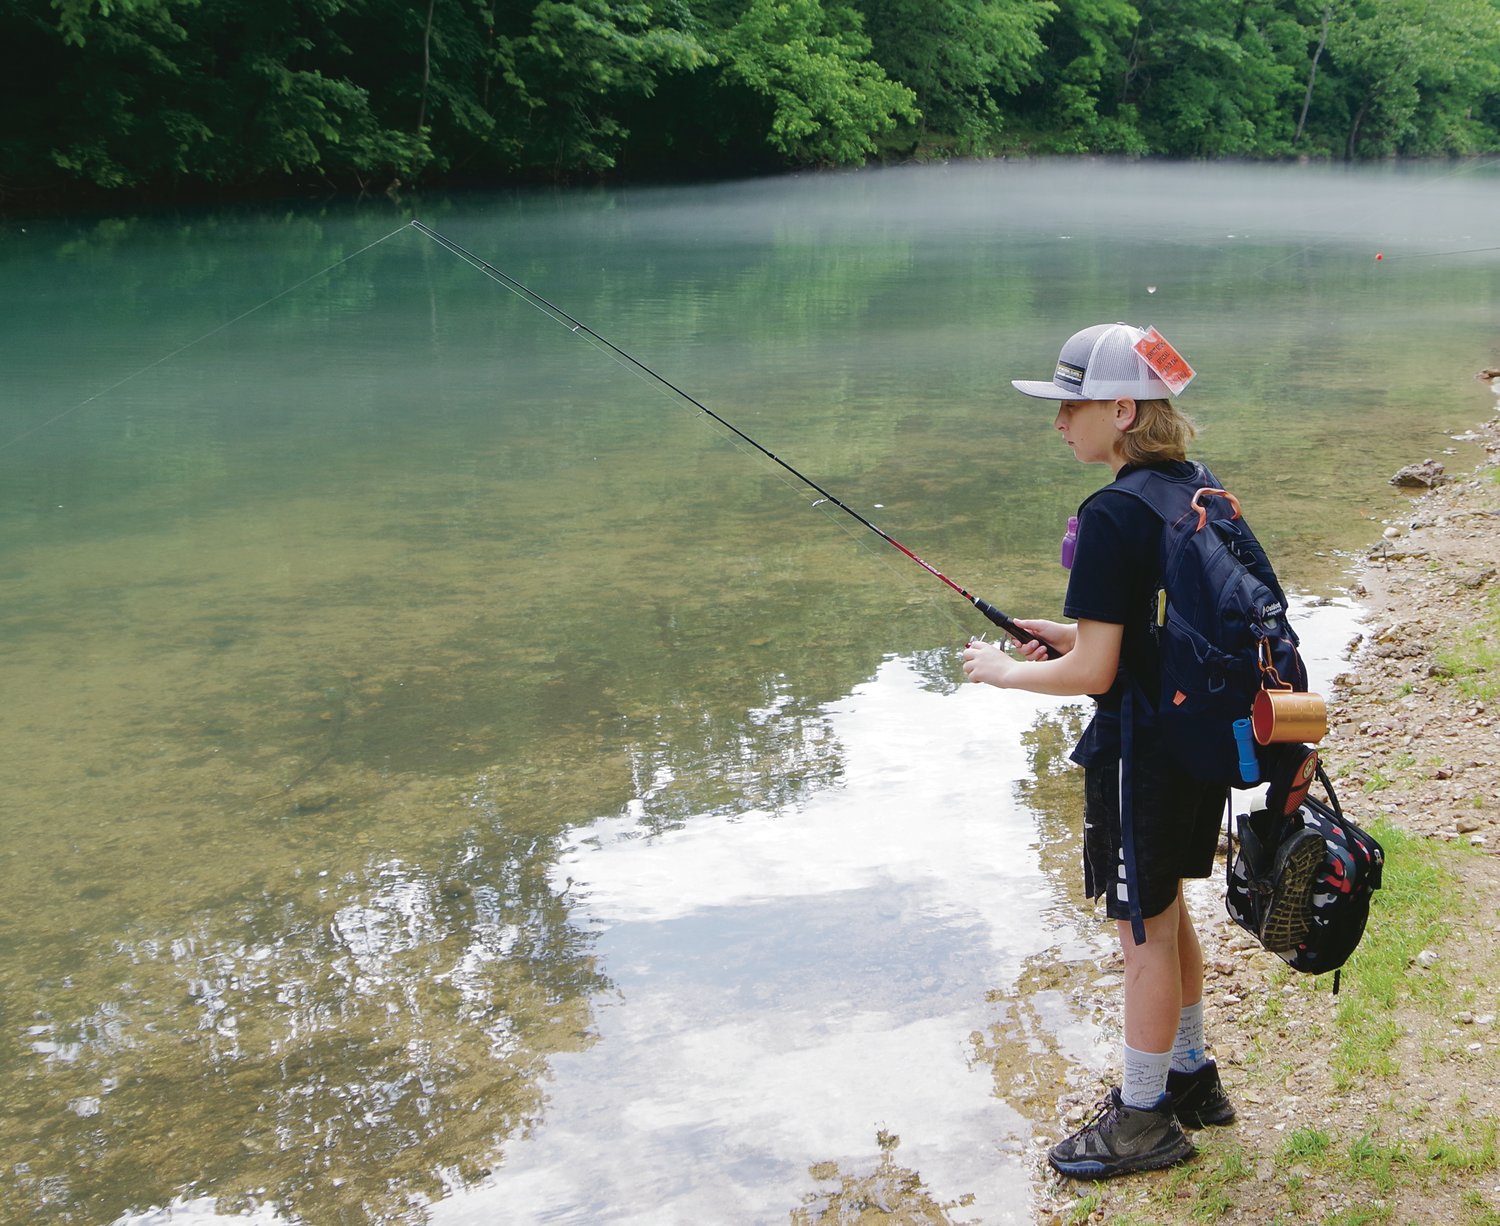 Aiden Hanson focuses on catching trout. Hanson, 11, said he did not have a favorite activity in the outdoor class. "I love it all," he said, but kayaking at Ha Ha Tonka and fishing in Bennett Spring State Park were very enjoyable.